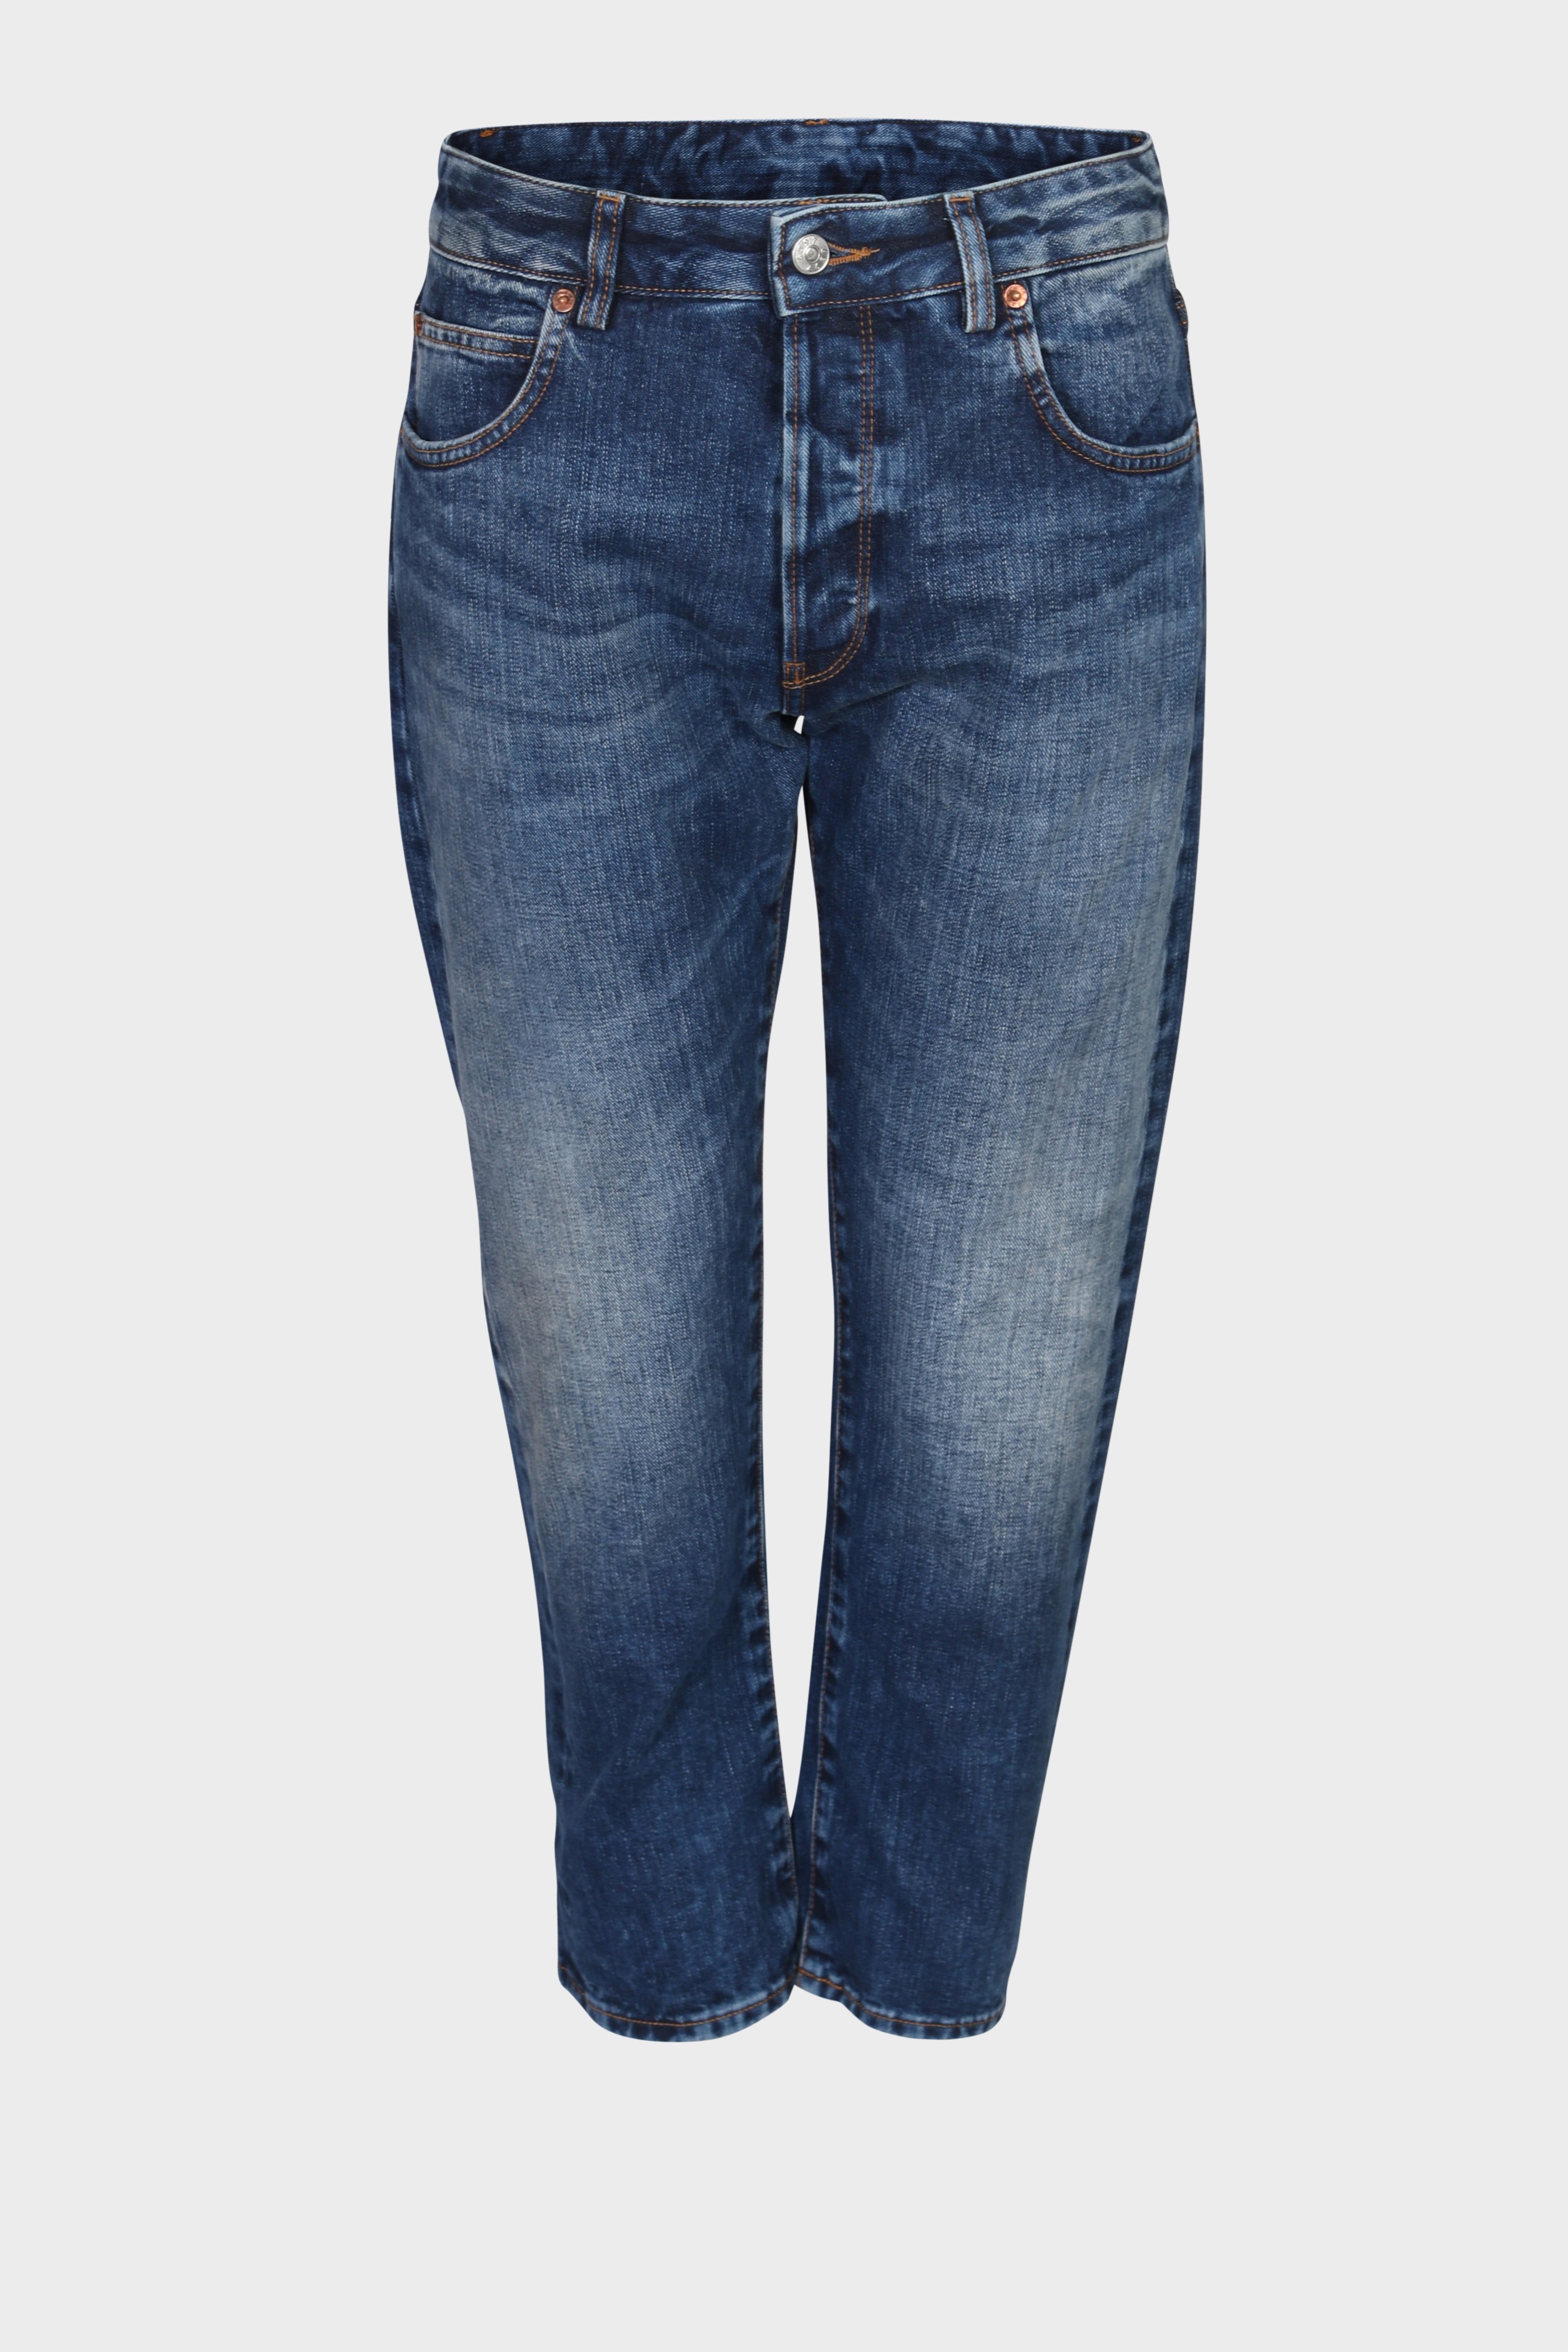 6397 Shorty Jeans in Hi-Contrast Blue 27